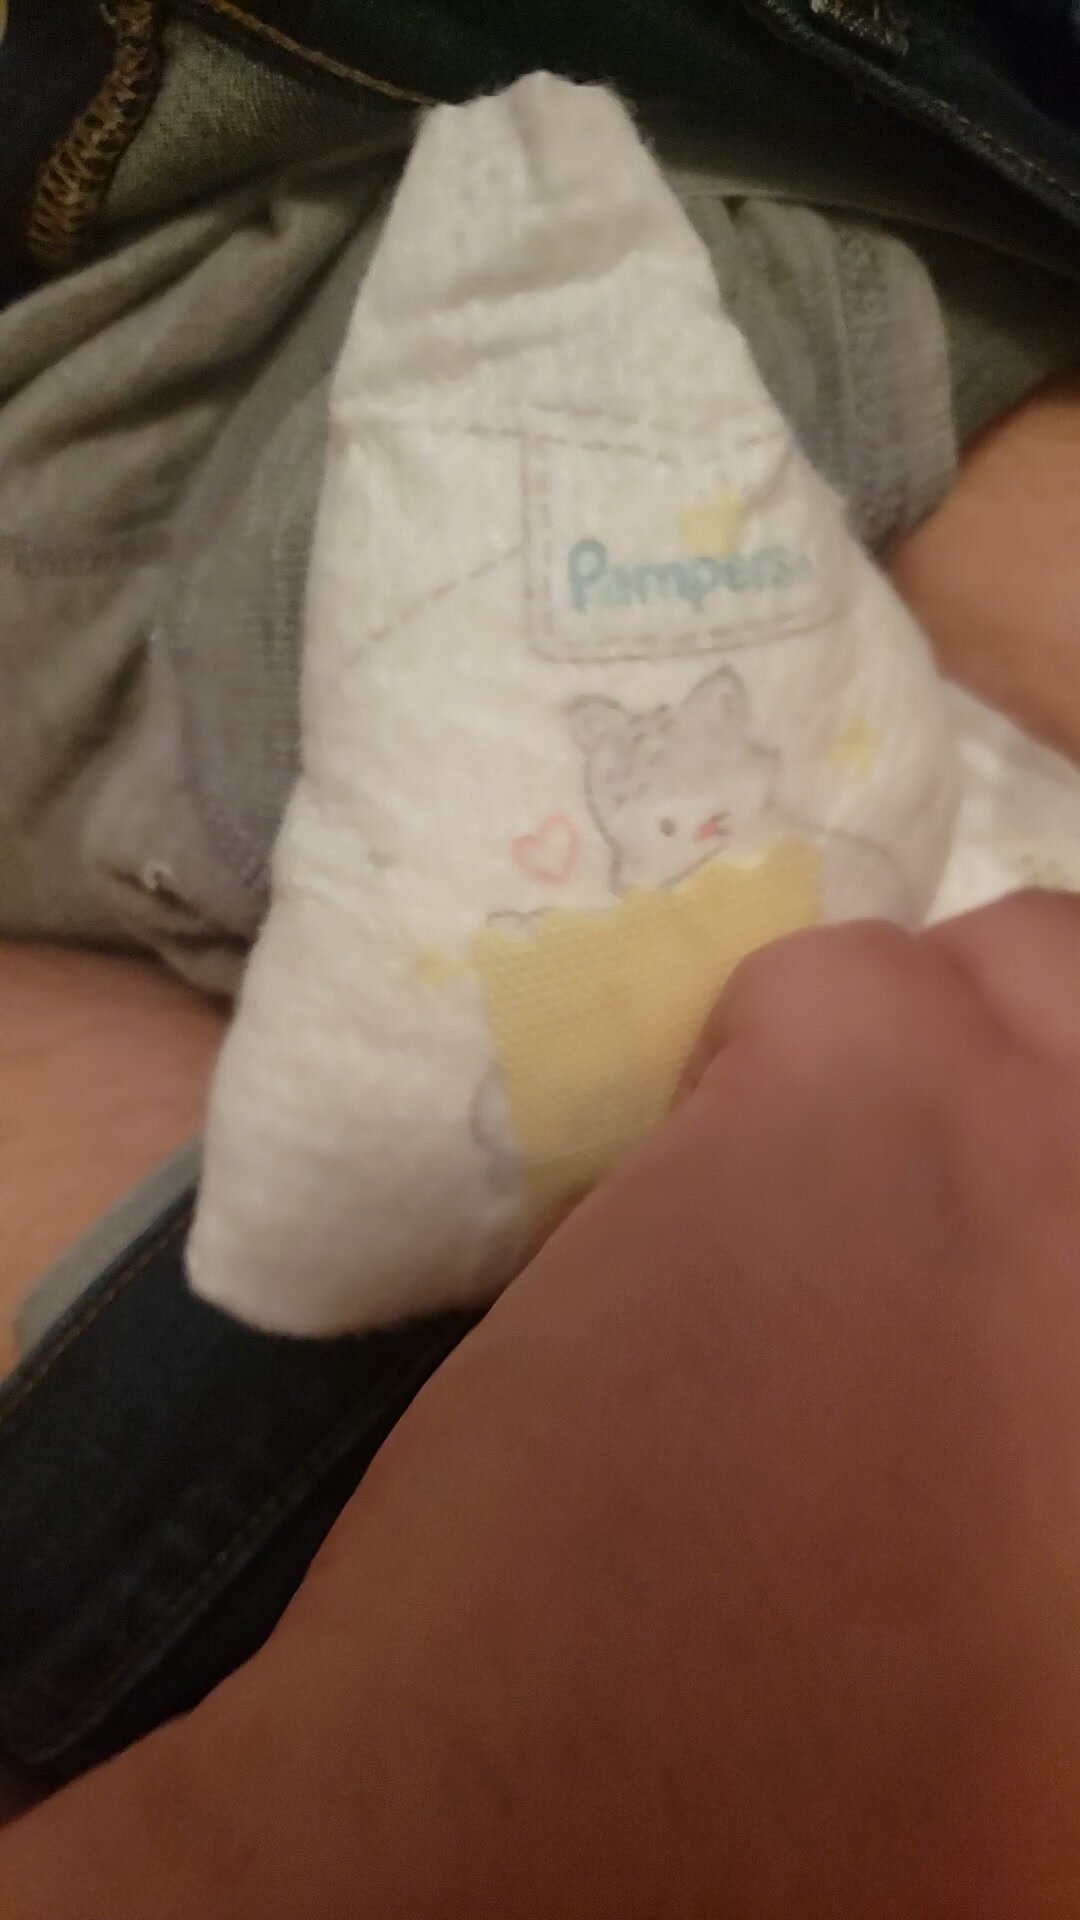 Pampers wet diaper play